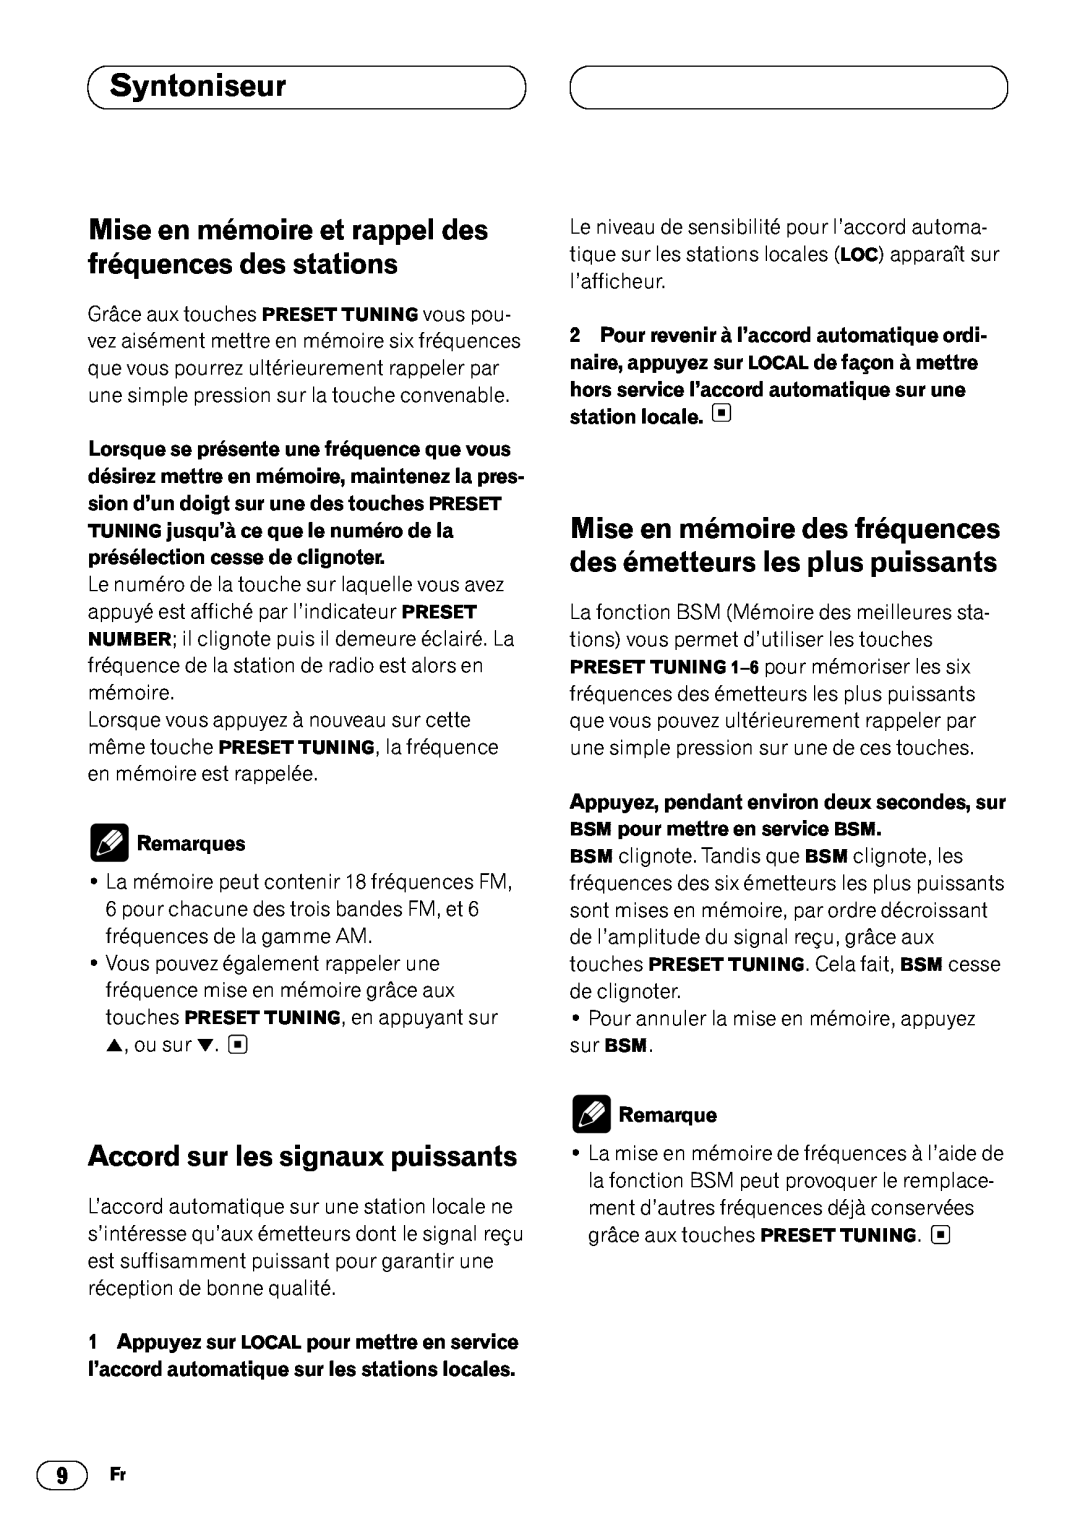 Pioneer DEH-3400 operation manual Accord sur les signaux puissants, Syntoniseur, Remarques 